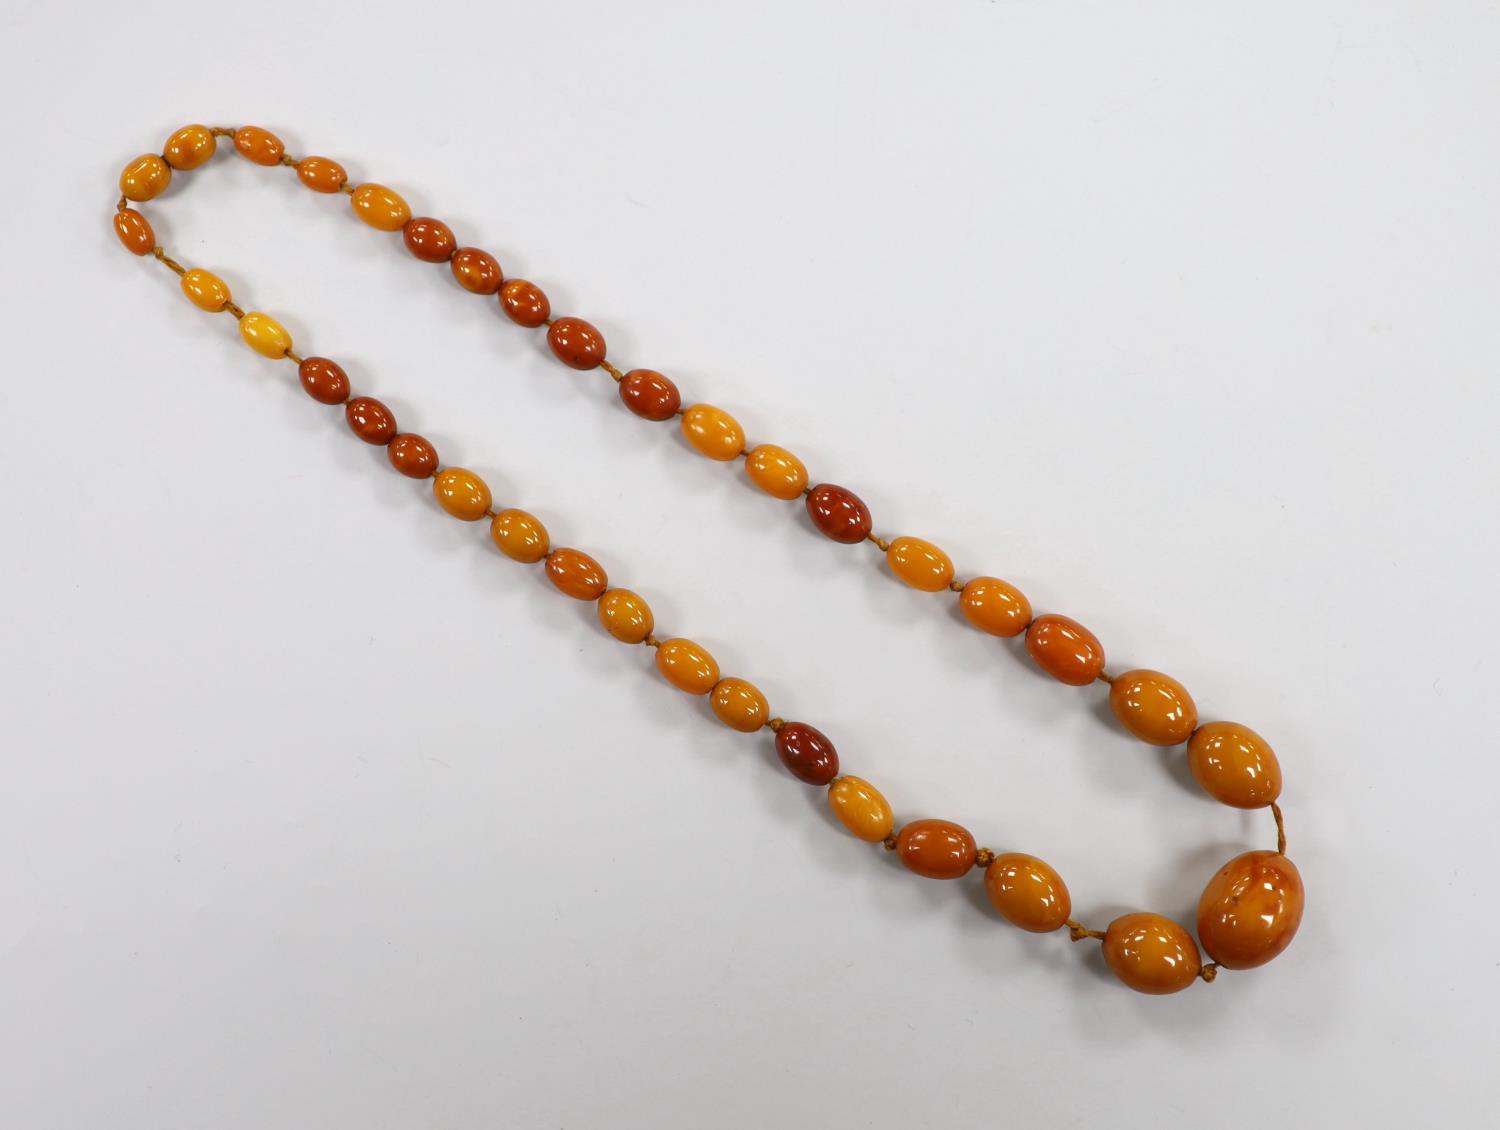 A single strand graduated amber bead necklace, 50cm, gross 31 grams. - Image 2 of 3